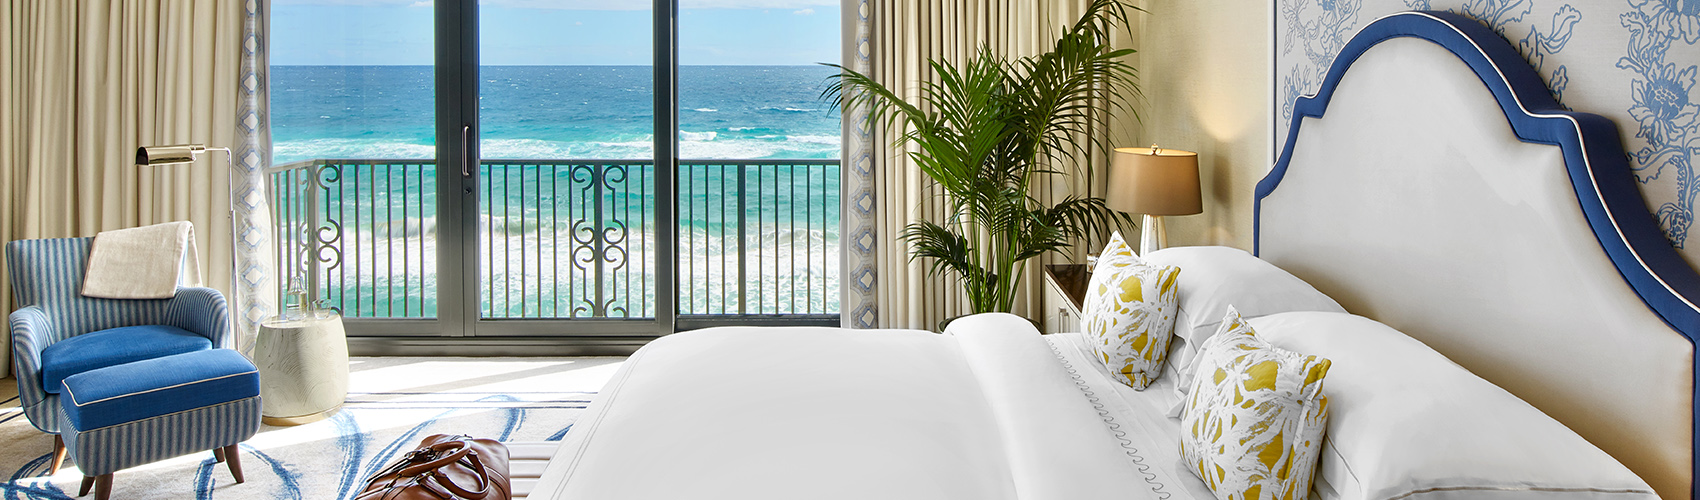 Oceanfront suite at The Breakers Palm Beach